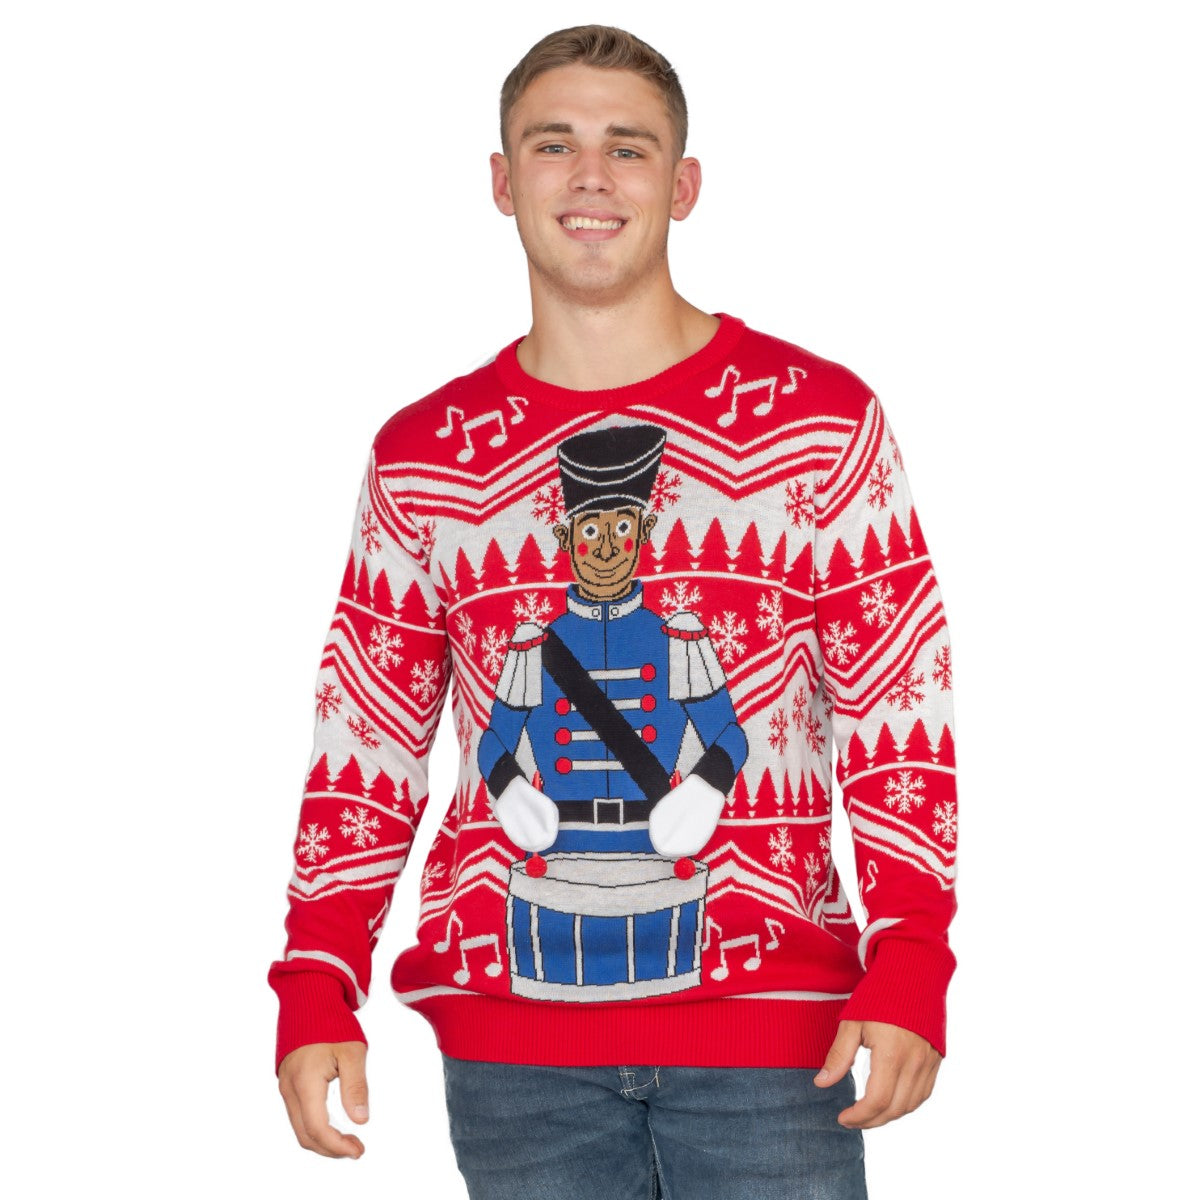 Flappy Drummer Boy Animated Ugly Christmas Sweater 2